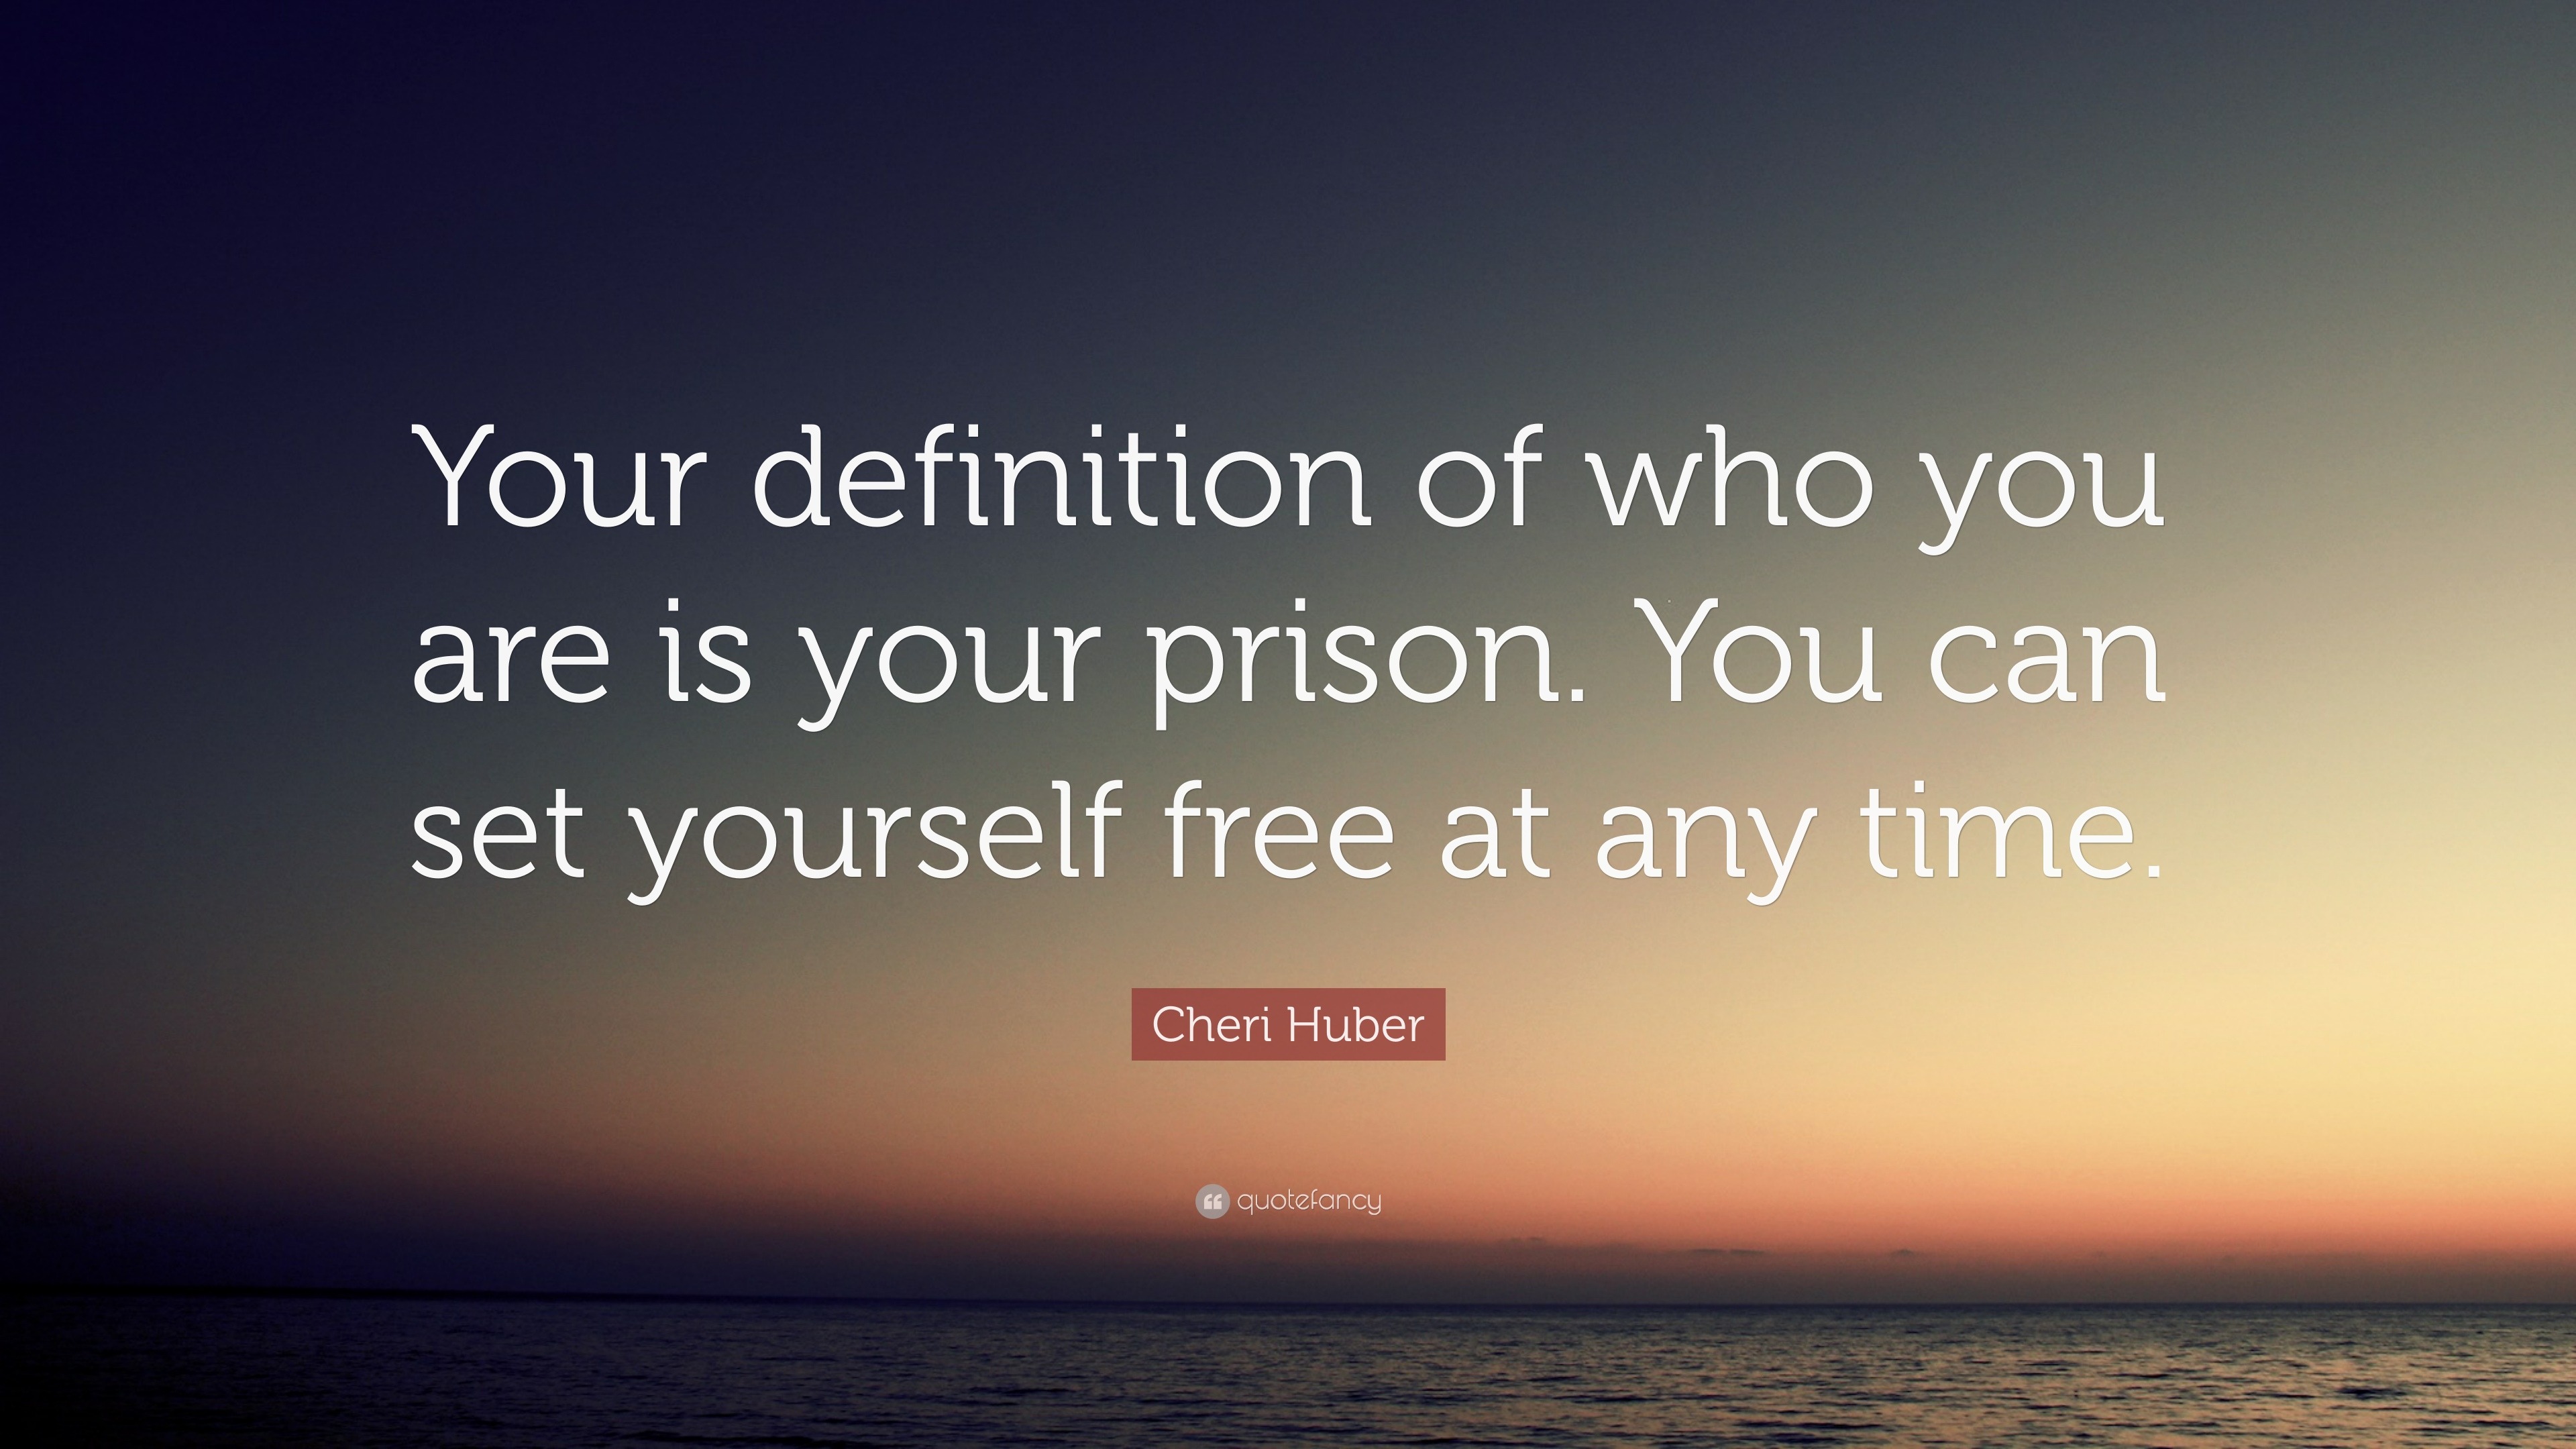 Quotes You can set yourself free at any moment.